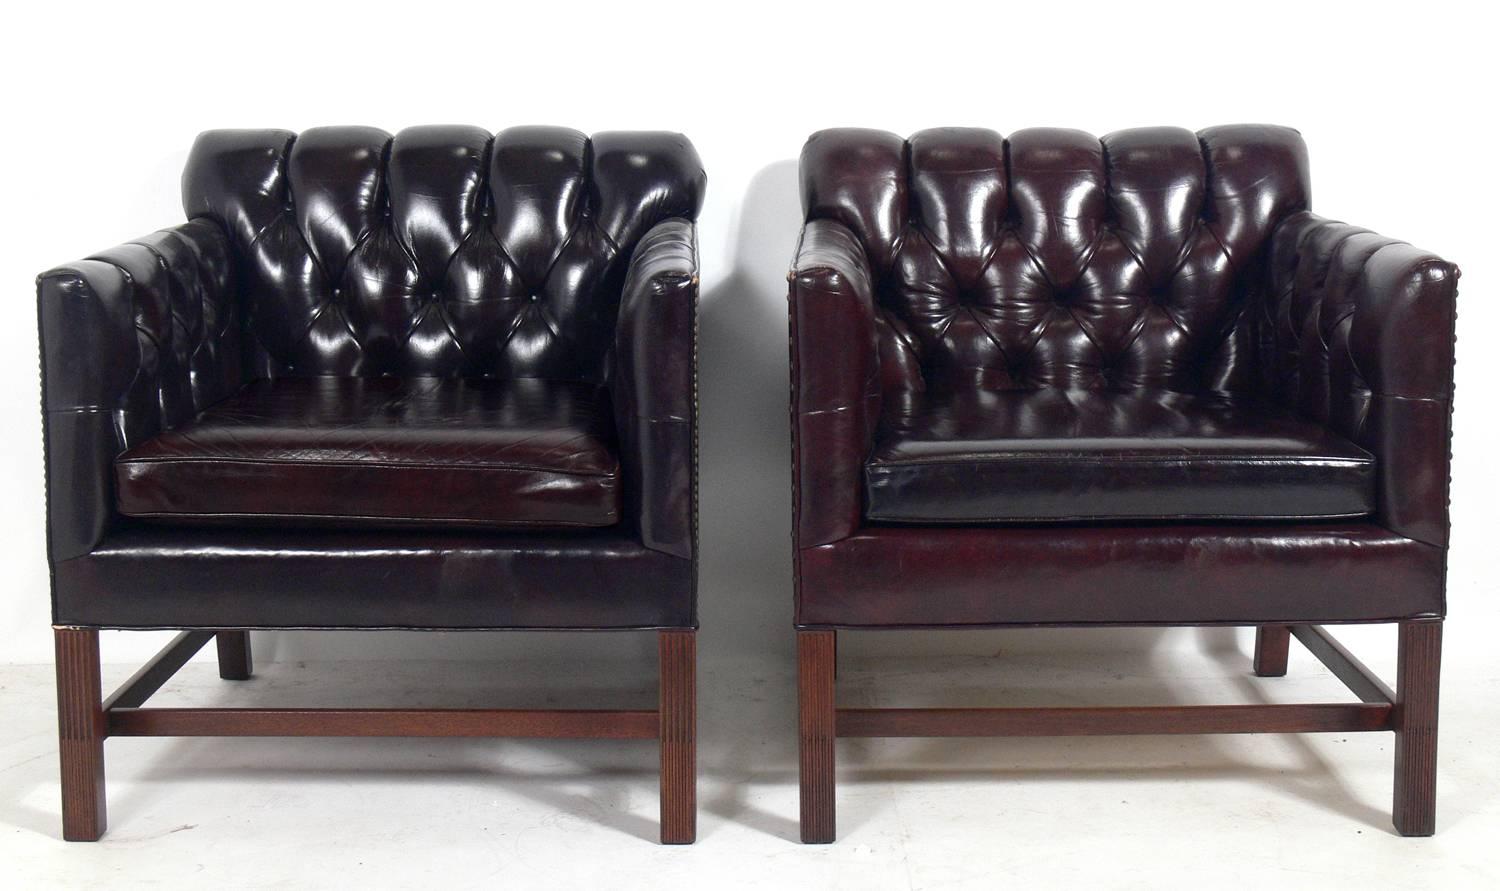 Pair of tufted cabernet color leather lounge chairs, made by the Kittinger Company, American, circa 1950s. Very comfortable pair of club chairs. They retain their wonderful original patina to the leather and brass nailheads and the mahogany wood